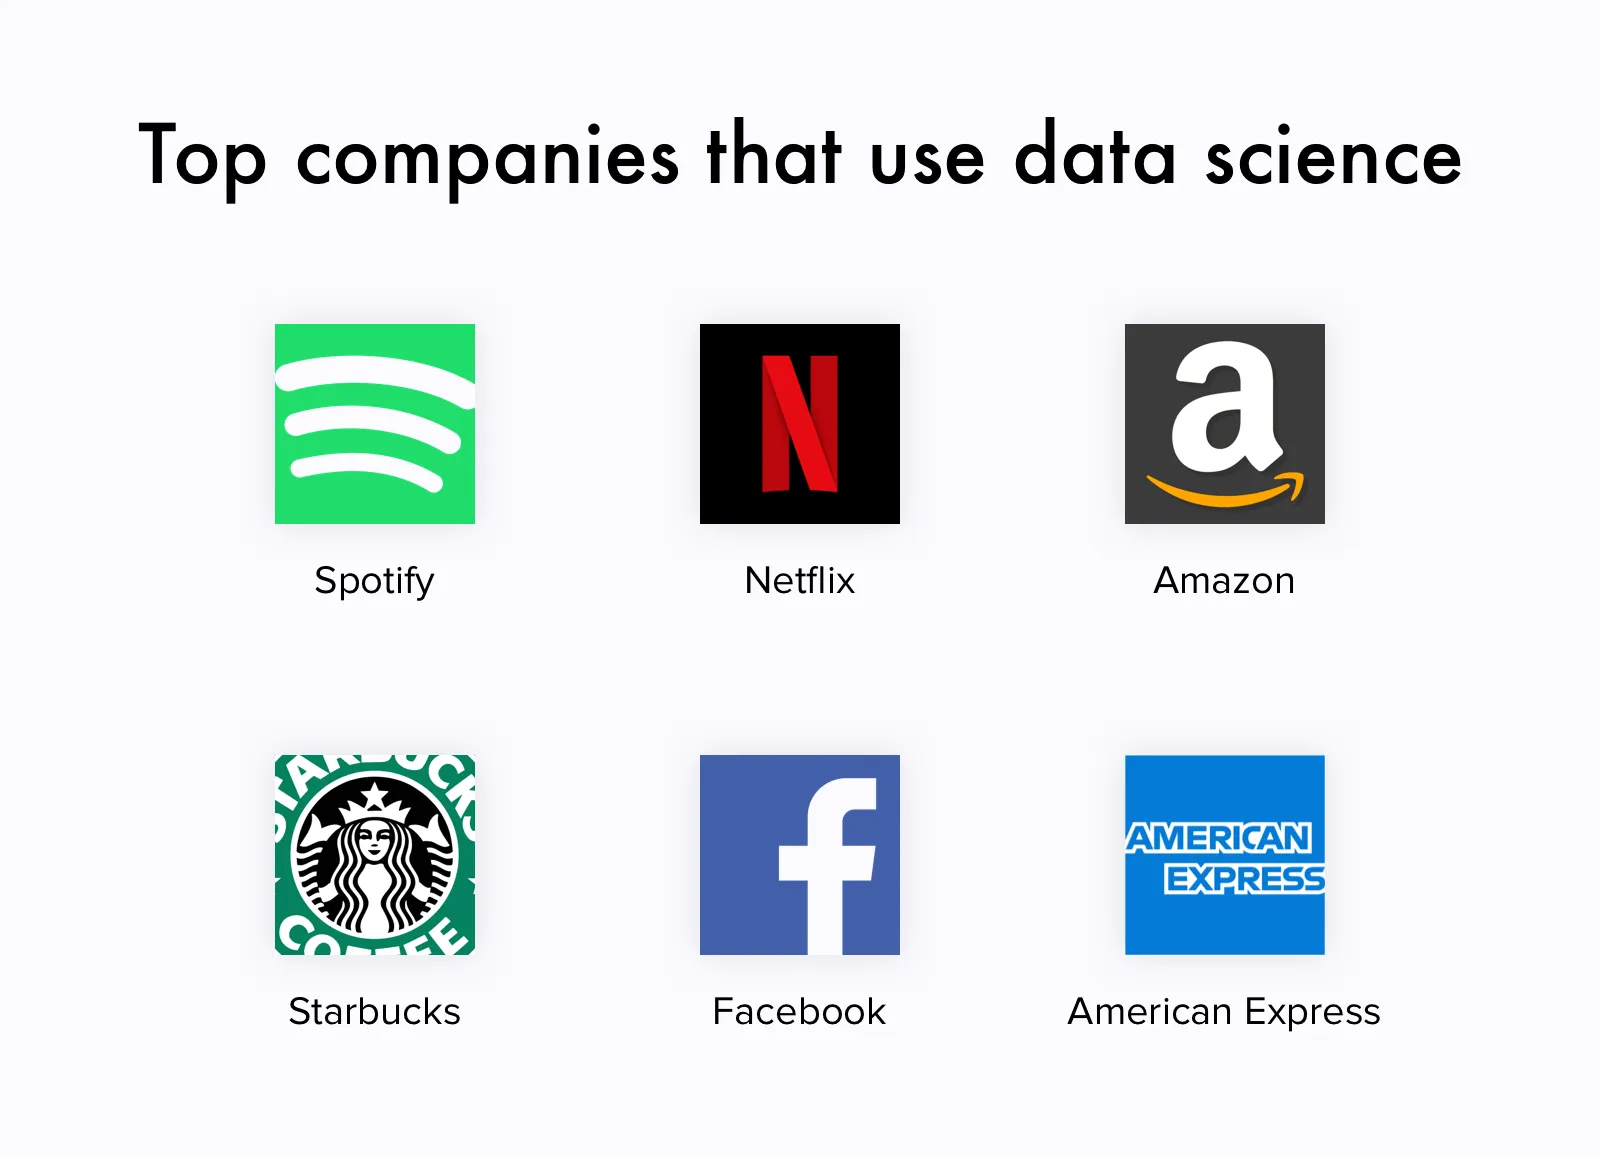 Top companies that use data science